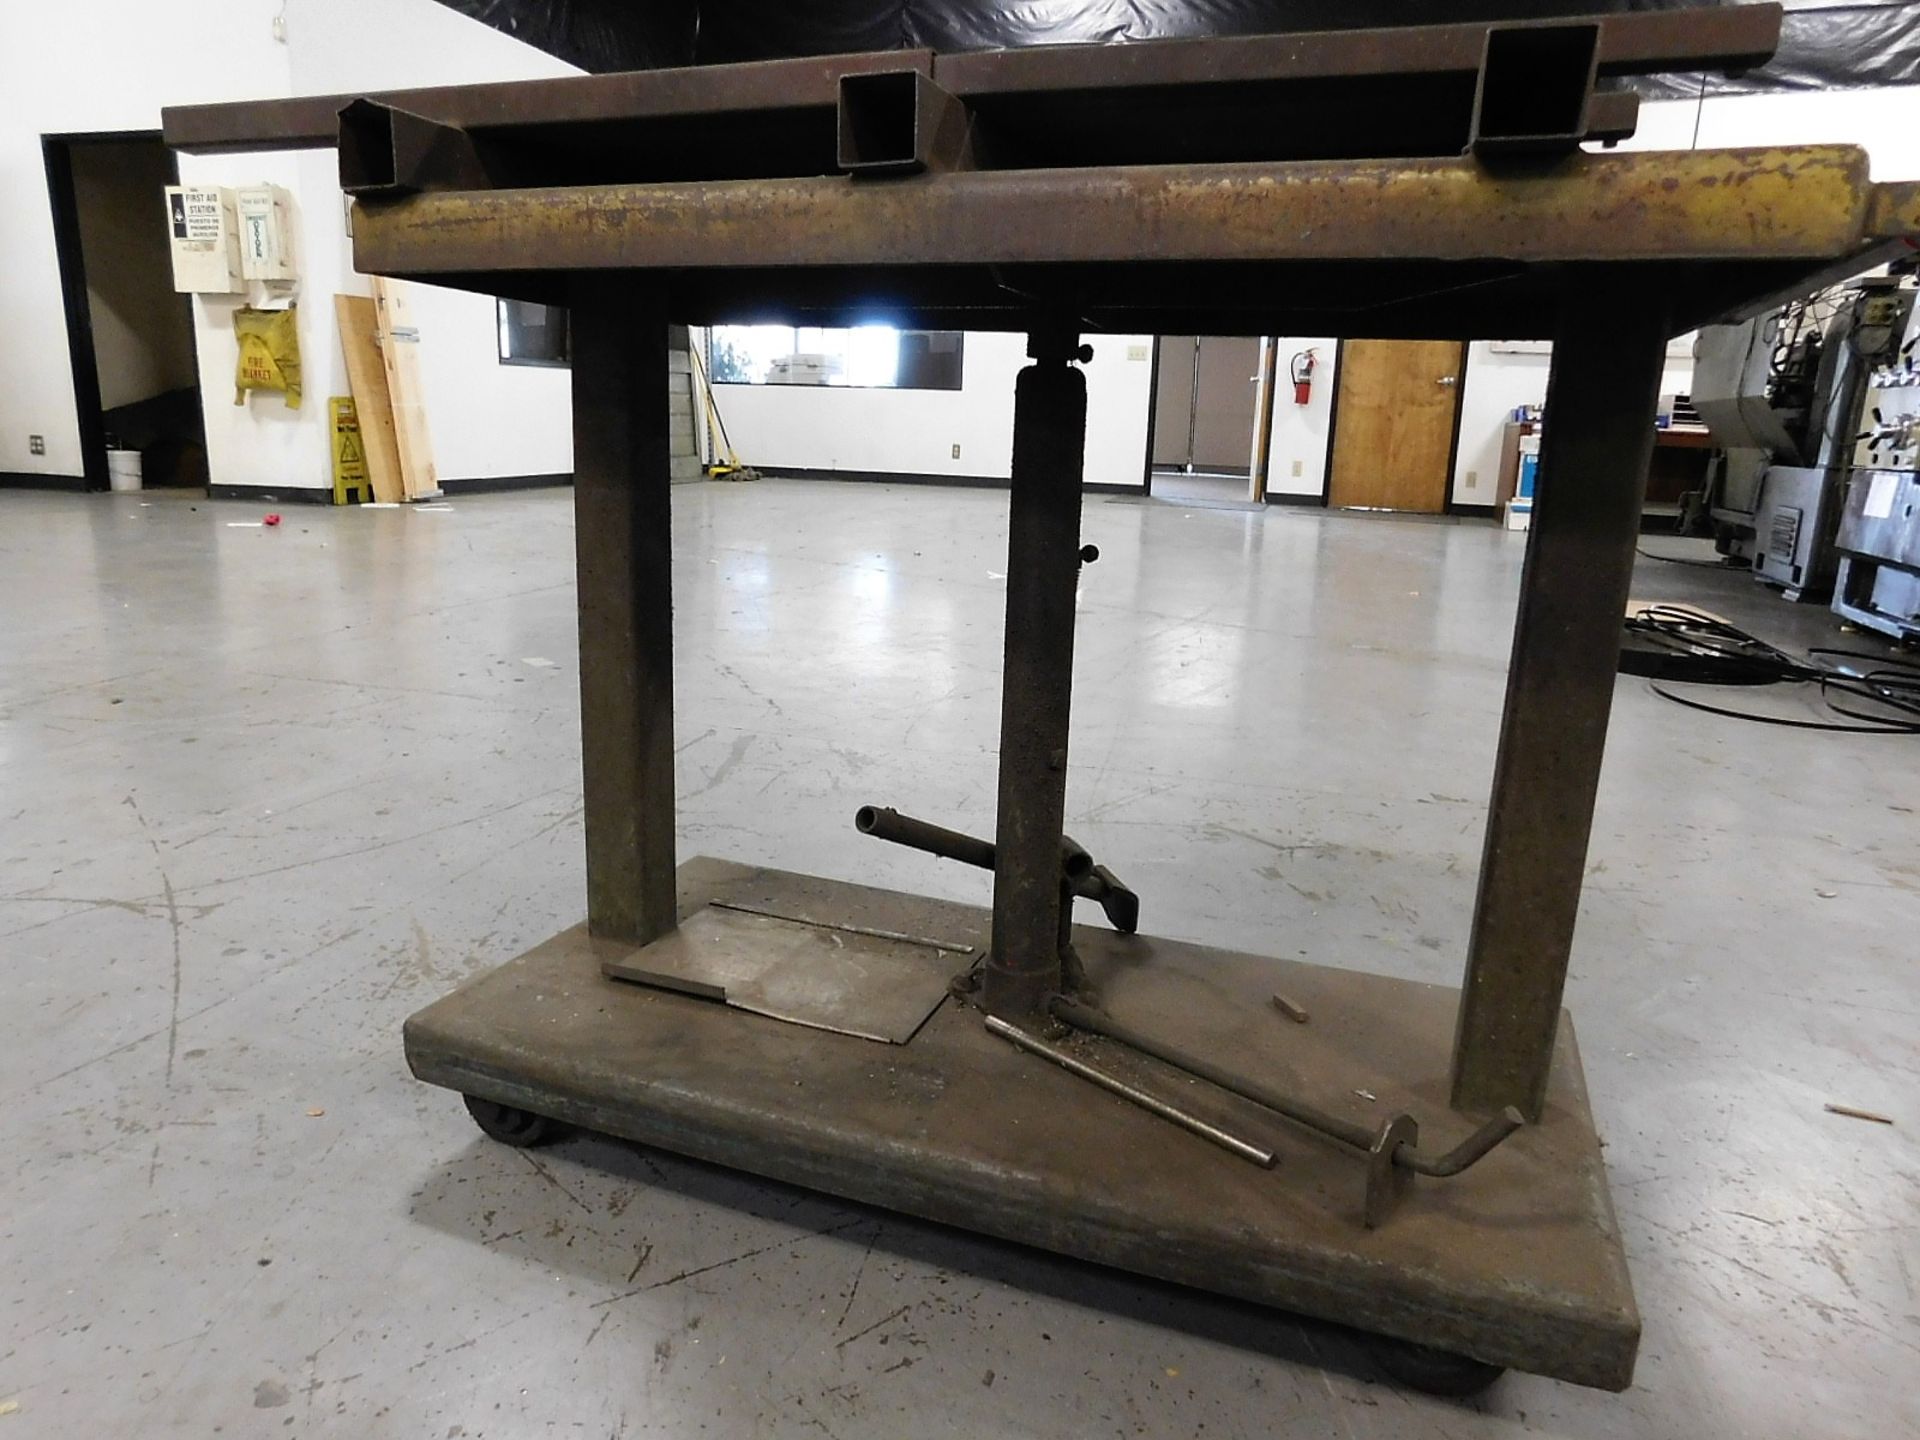 HYDRAULIC TABLE LIFT CART, MANUAL, TOP IS 3' X 18" - Image 2 of 2